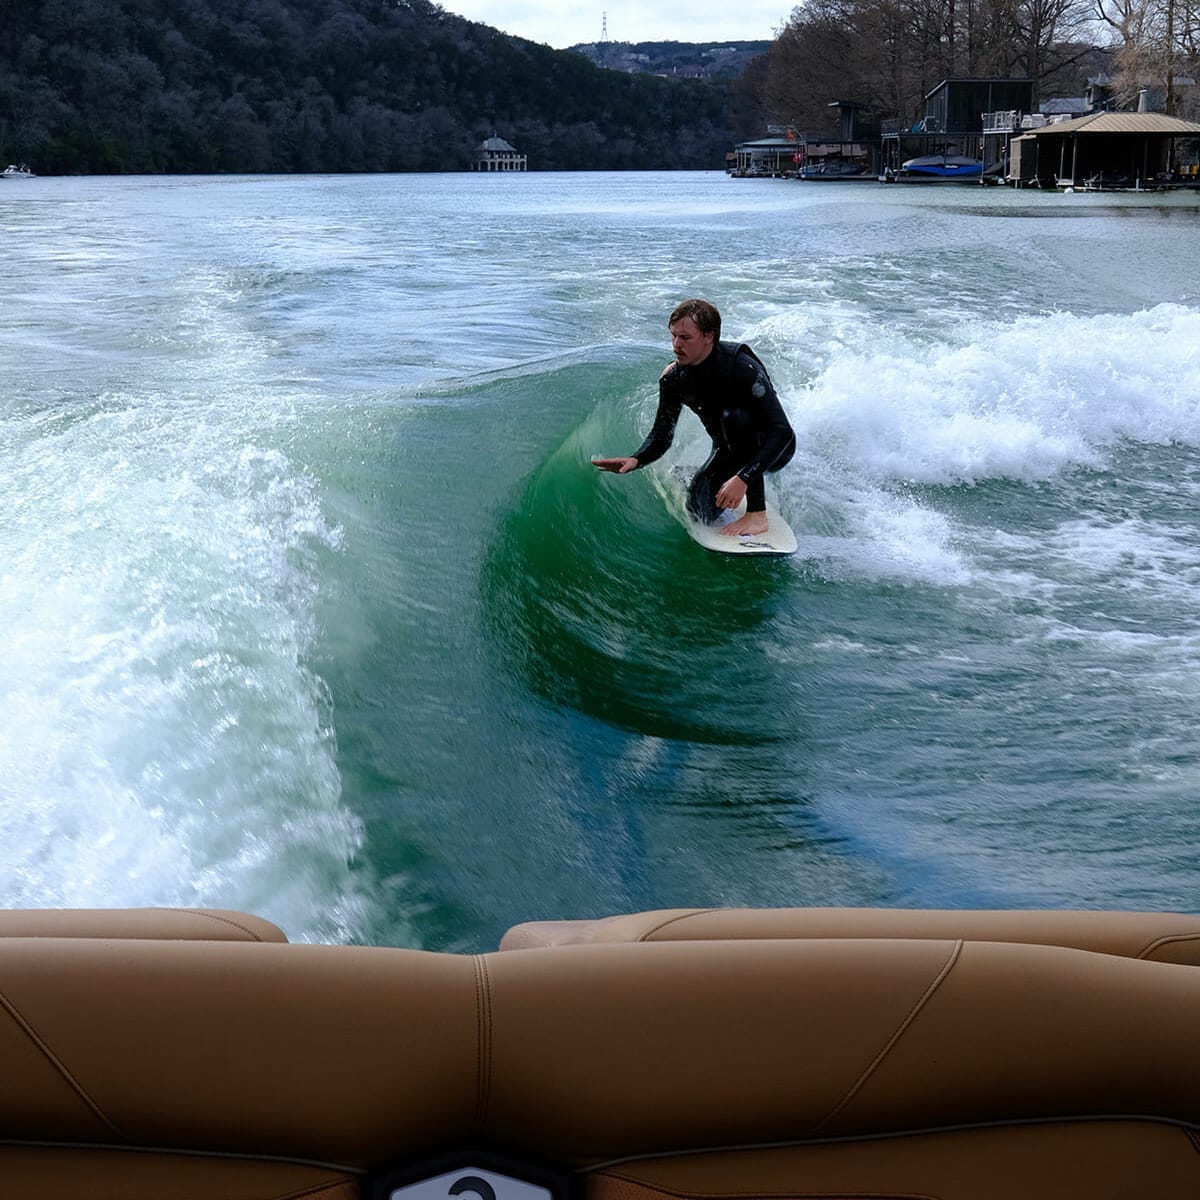 A man riding a wakesurf board in a wakeboat.